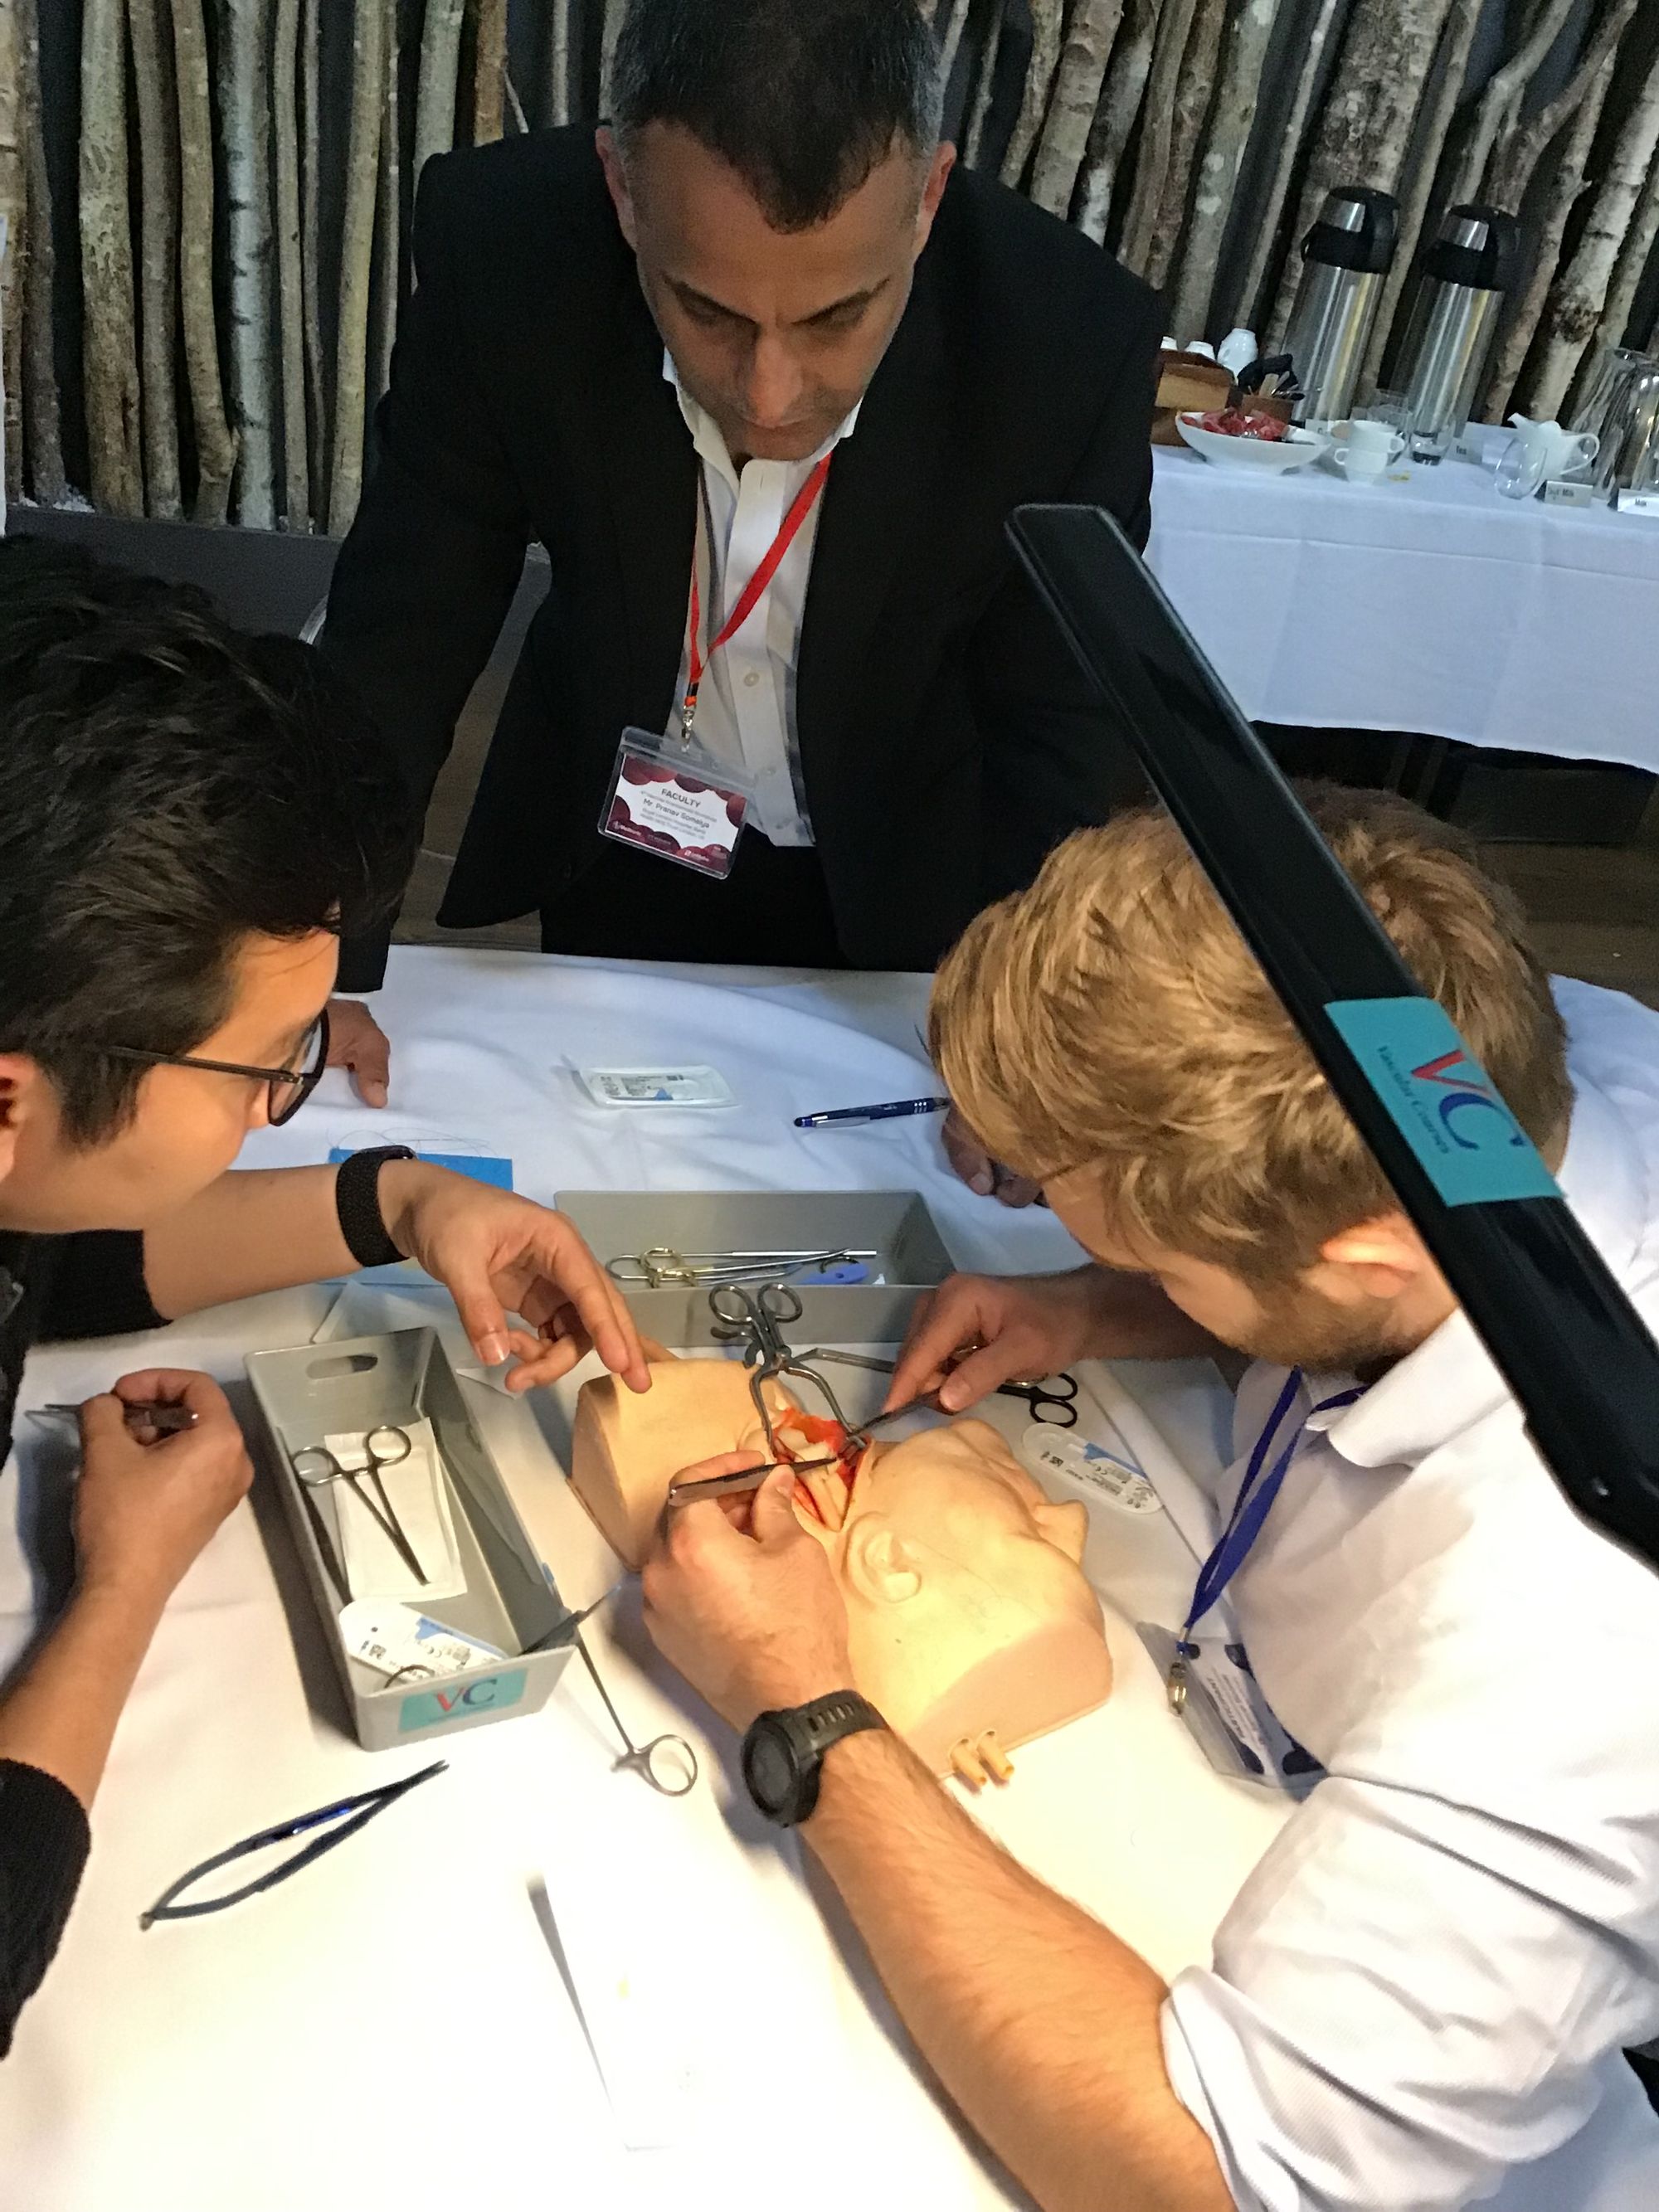 4th NCIC Vascular Anastomosis Workshop 24/05/2024 a course made for you. “The Royal College of Surgeons of England has awarded up to 6.5 CPD points” for the event.